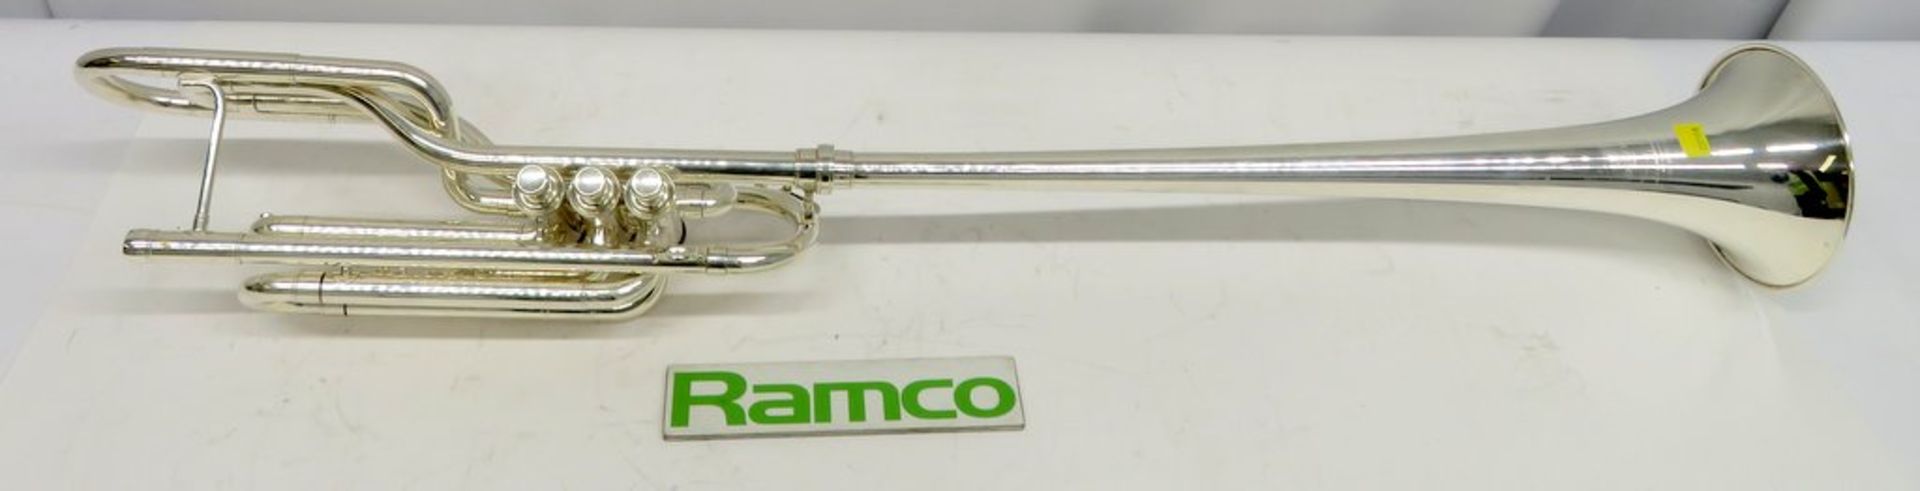 Besson International BE708 Fanfare Trumpet Complete With Case. - Image 4 of 16